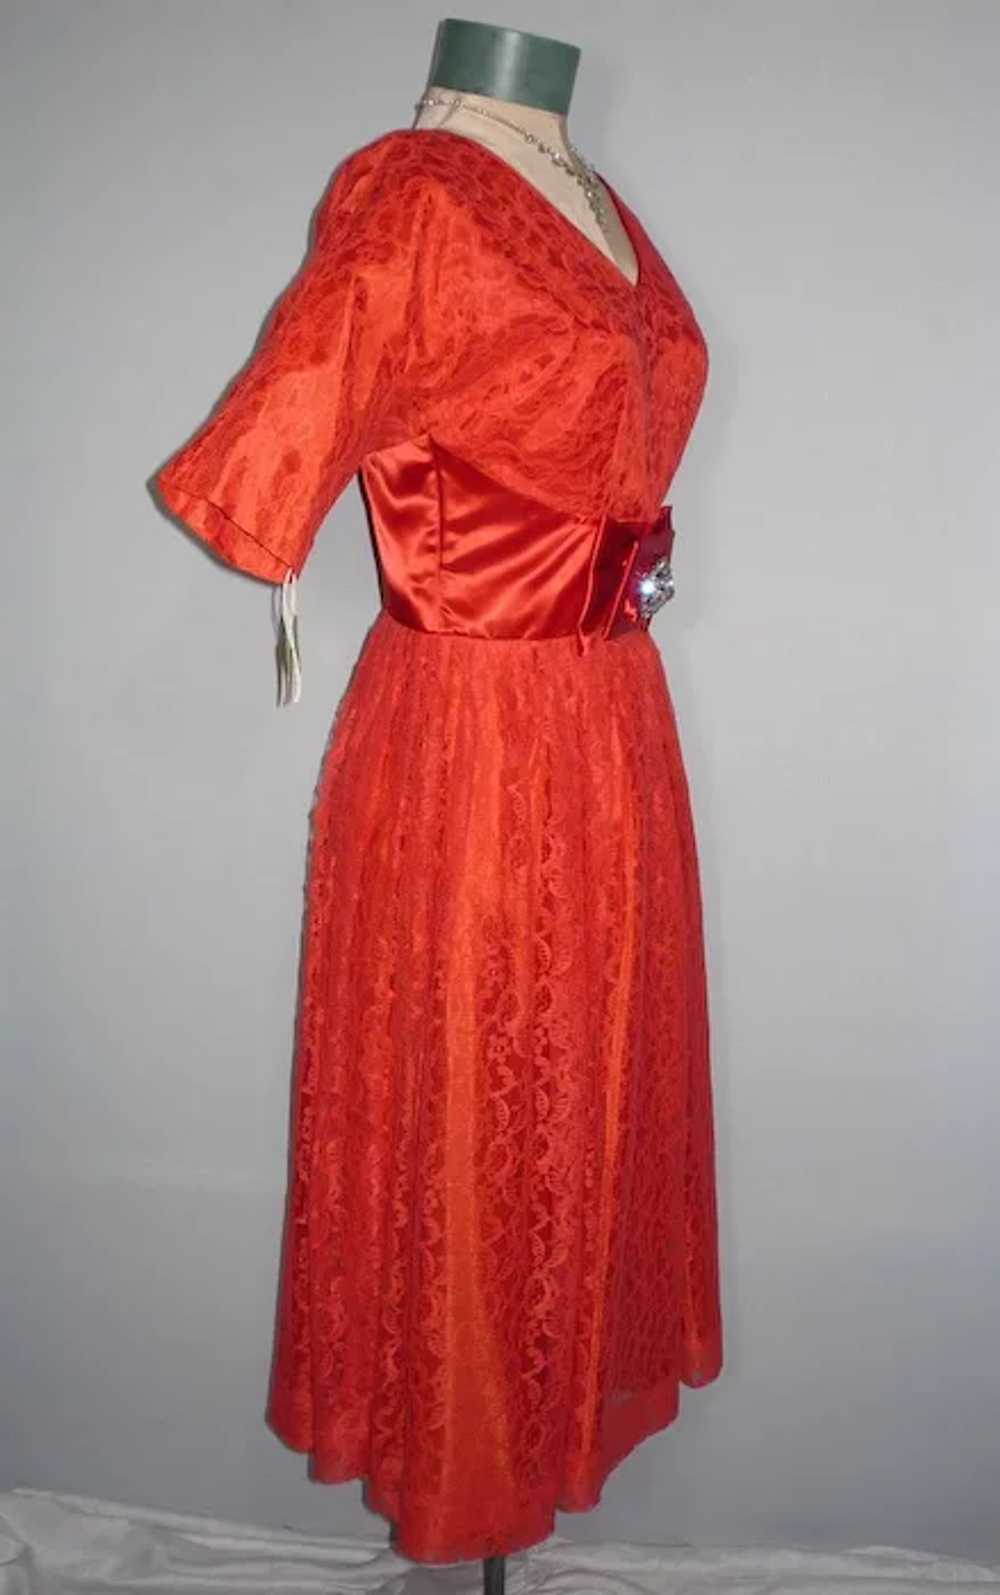 Vintage 1950s Red Chantilly Lace Party Dress - image 4